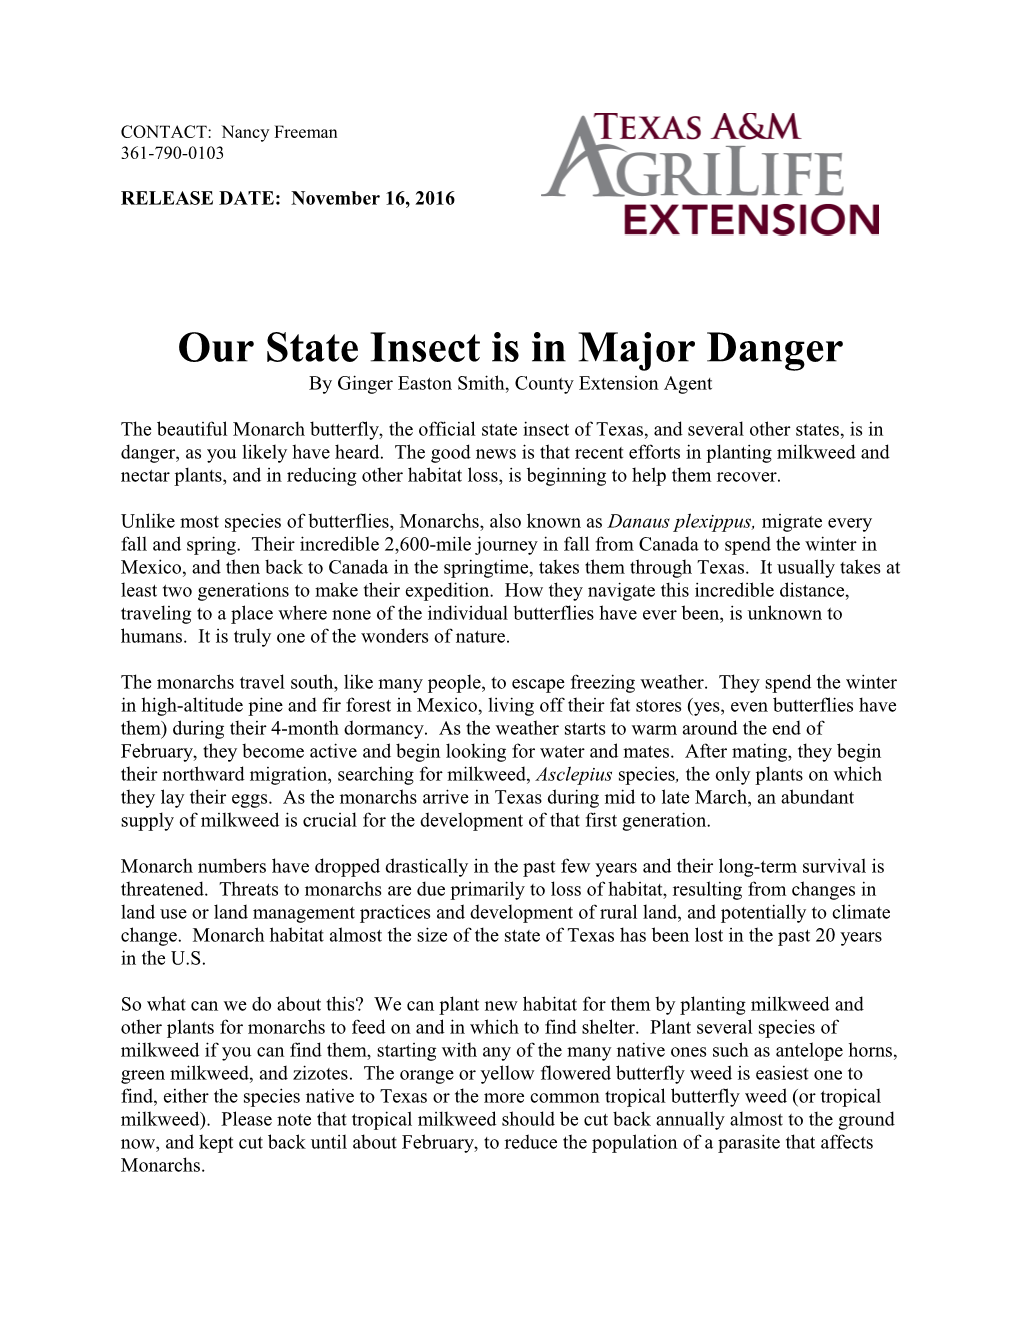 Our State Insect Is in Major Danger